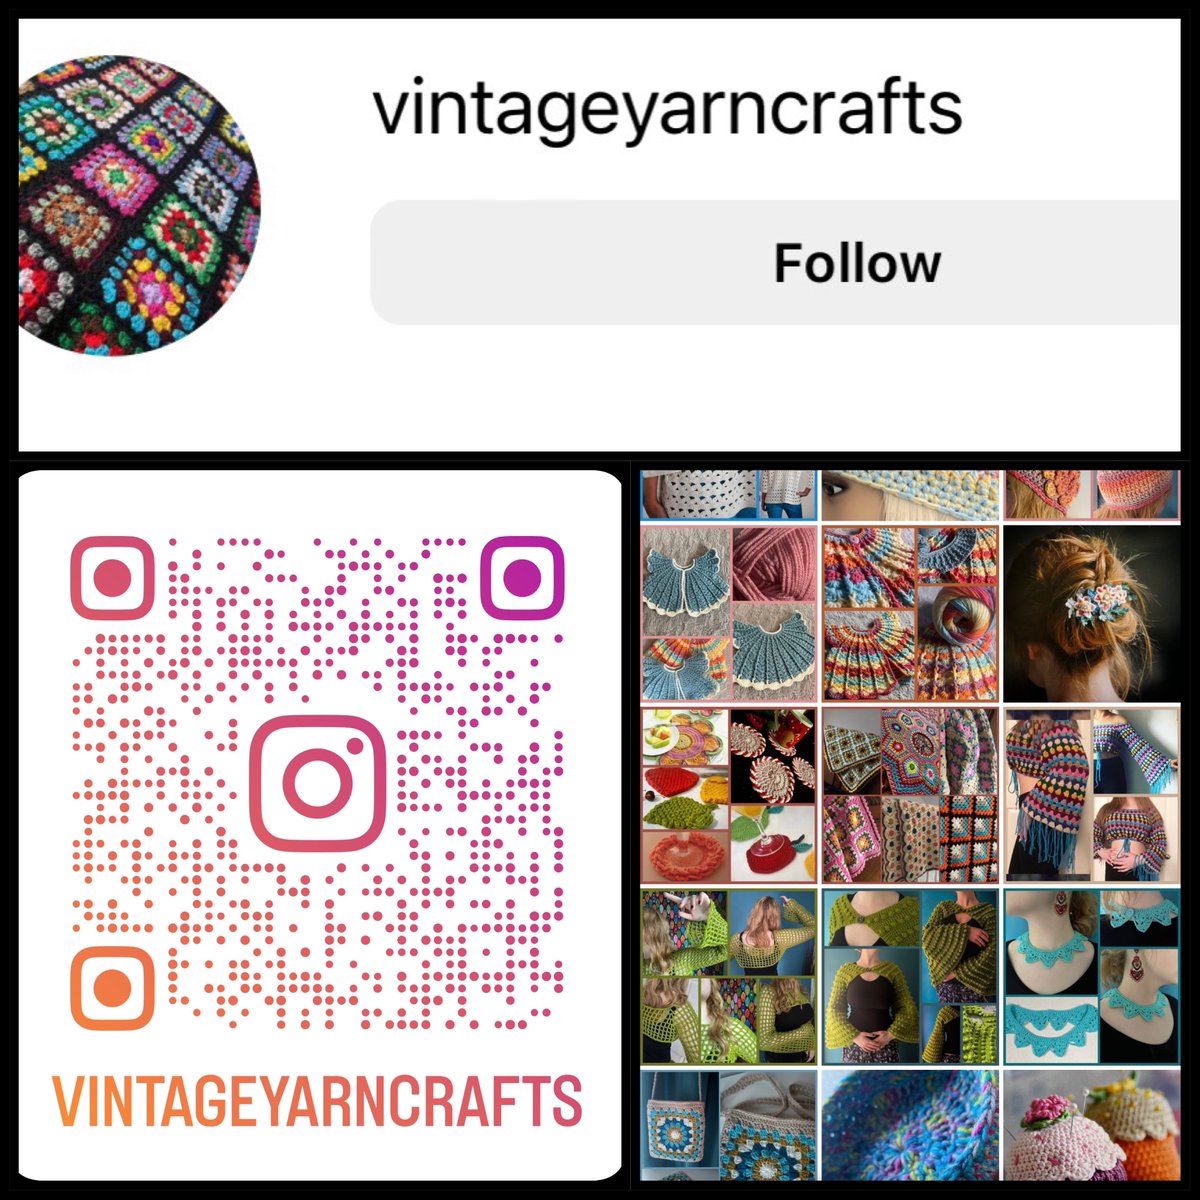 Morning All ☕️🫖 I am really trying to use Instagram. I don't have the app as yet... But that's my username 😊 #MHHSBD #crochet #earlybiz #instagram #connection #yarn #craftbizparty #share #wip #socialmedia #socialsunday